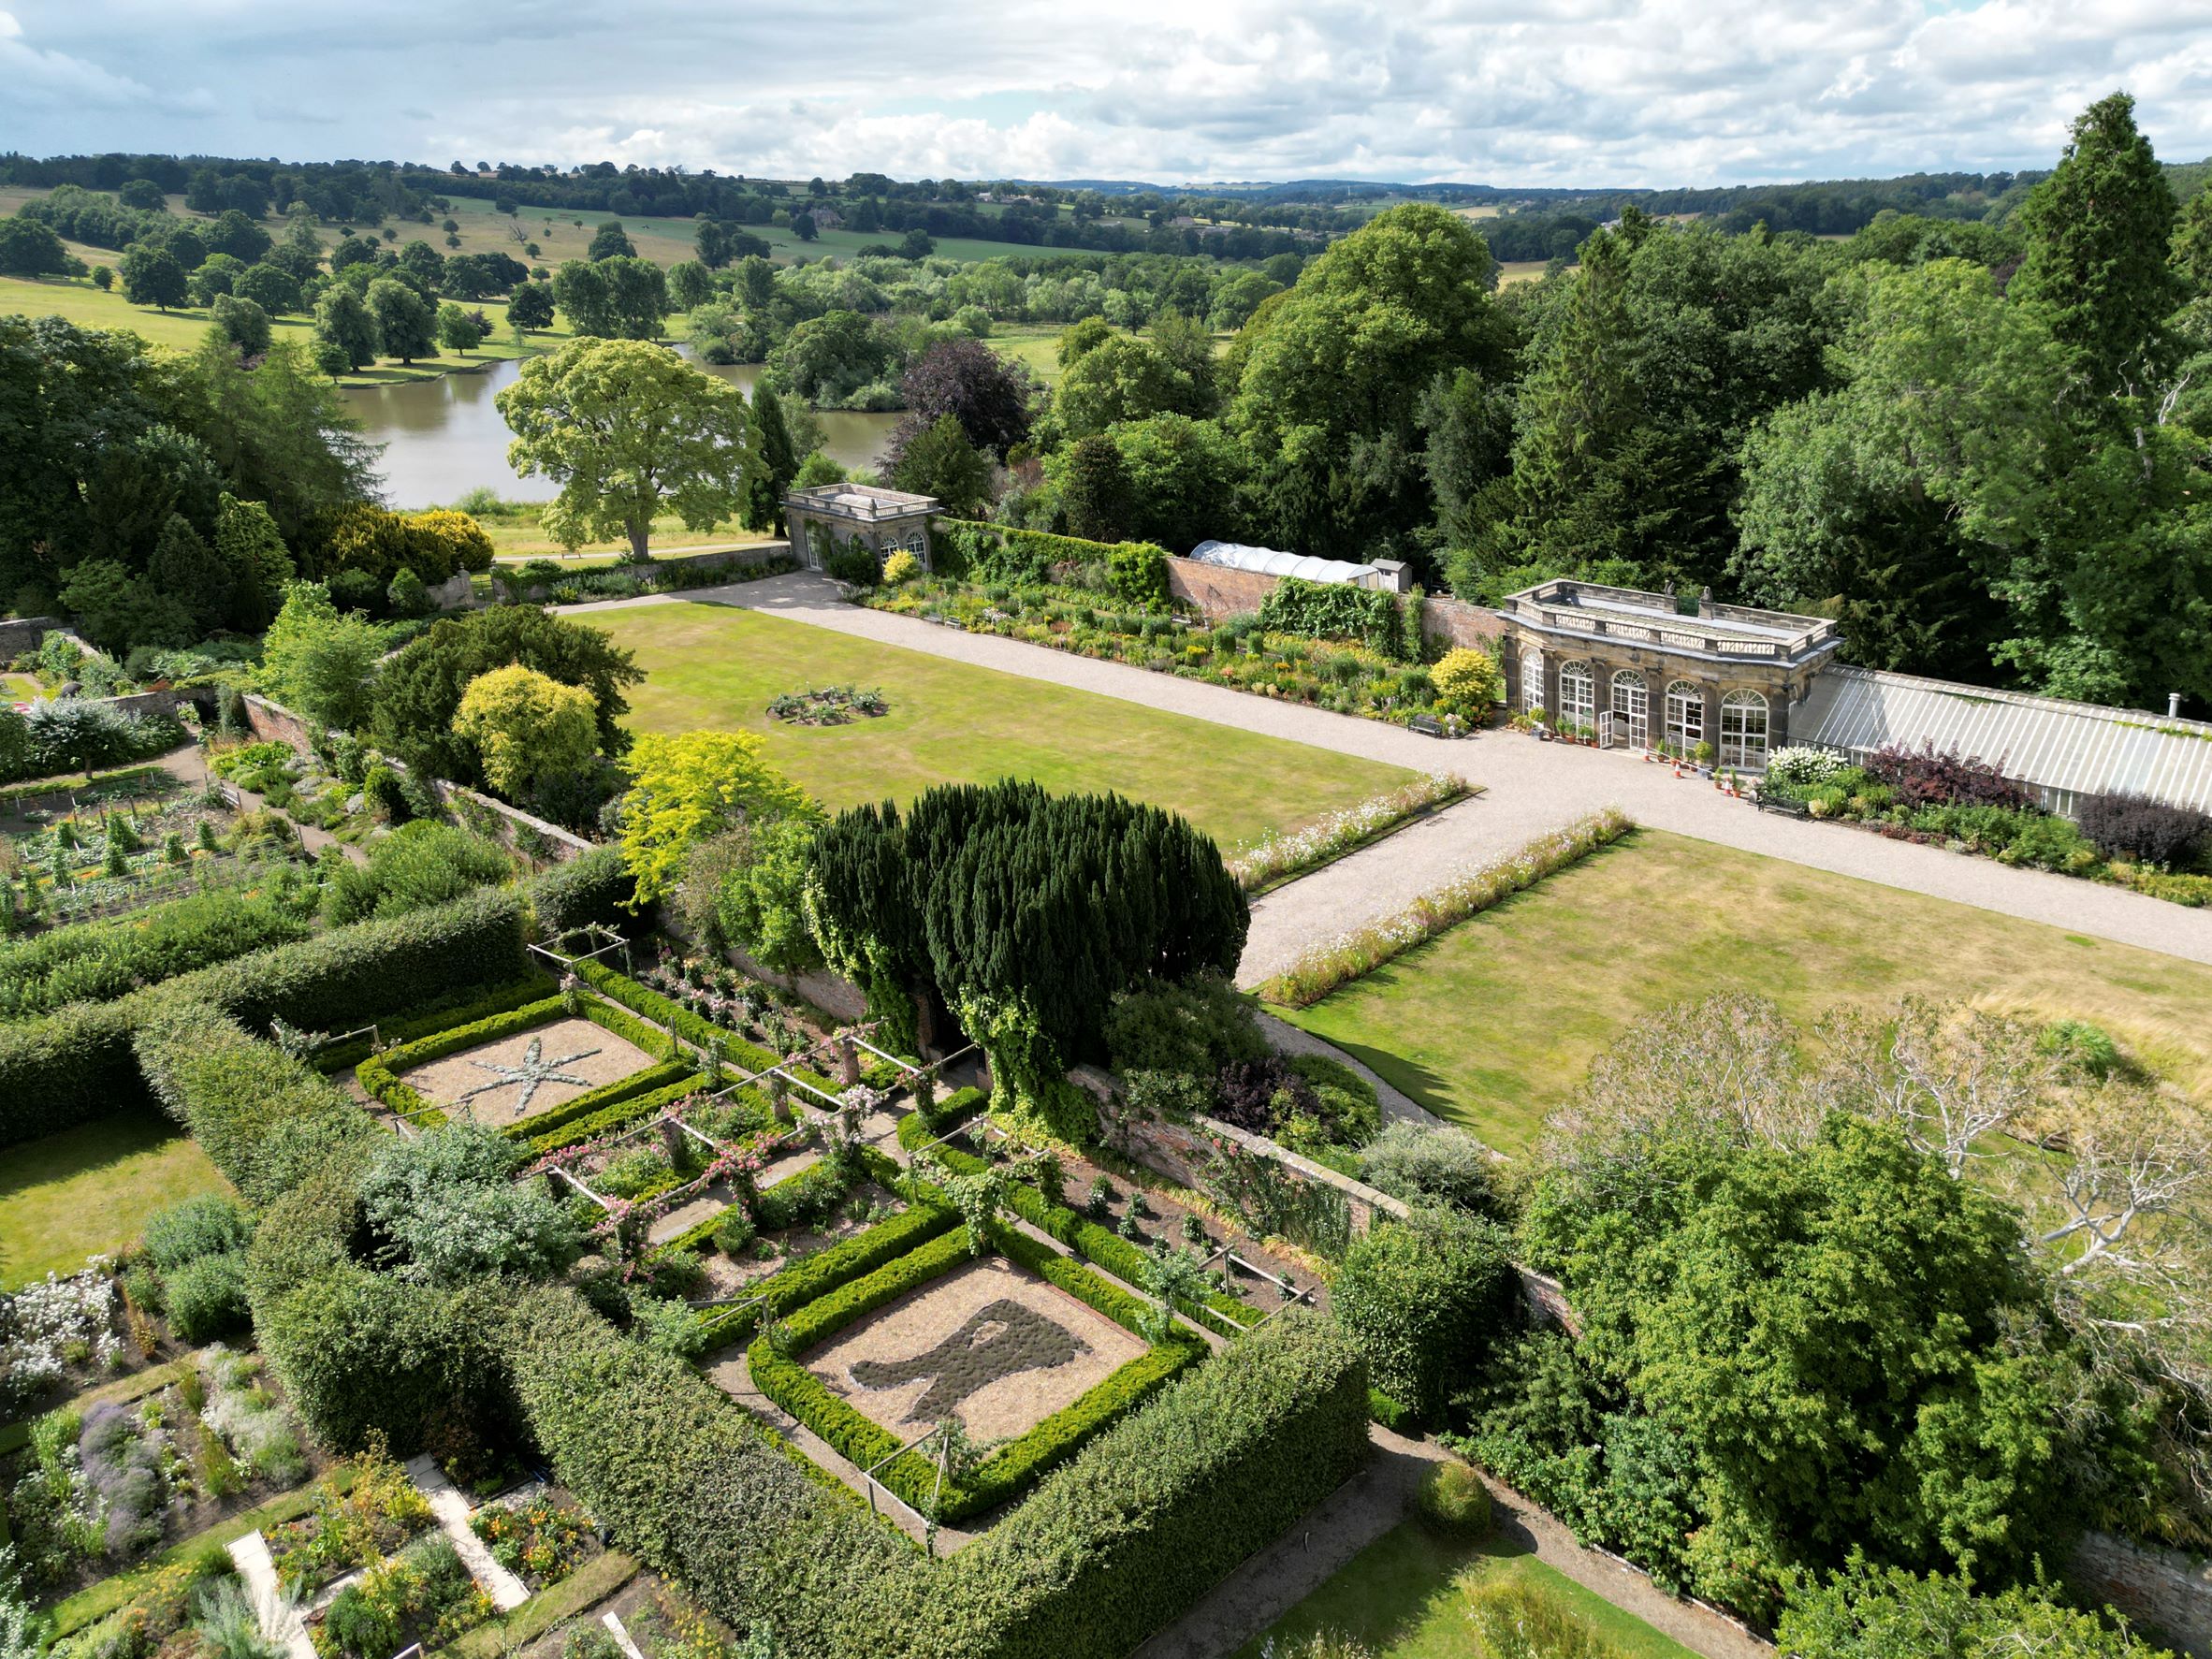 The grounds of Ripley Castle seen from the air. The formal gardens are seen in the foreground with wider parkland and a pond in the background.